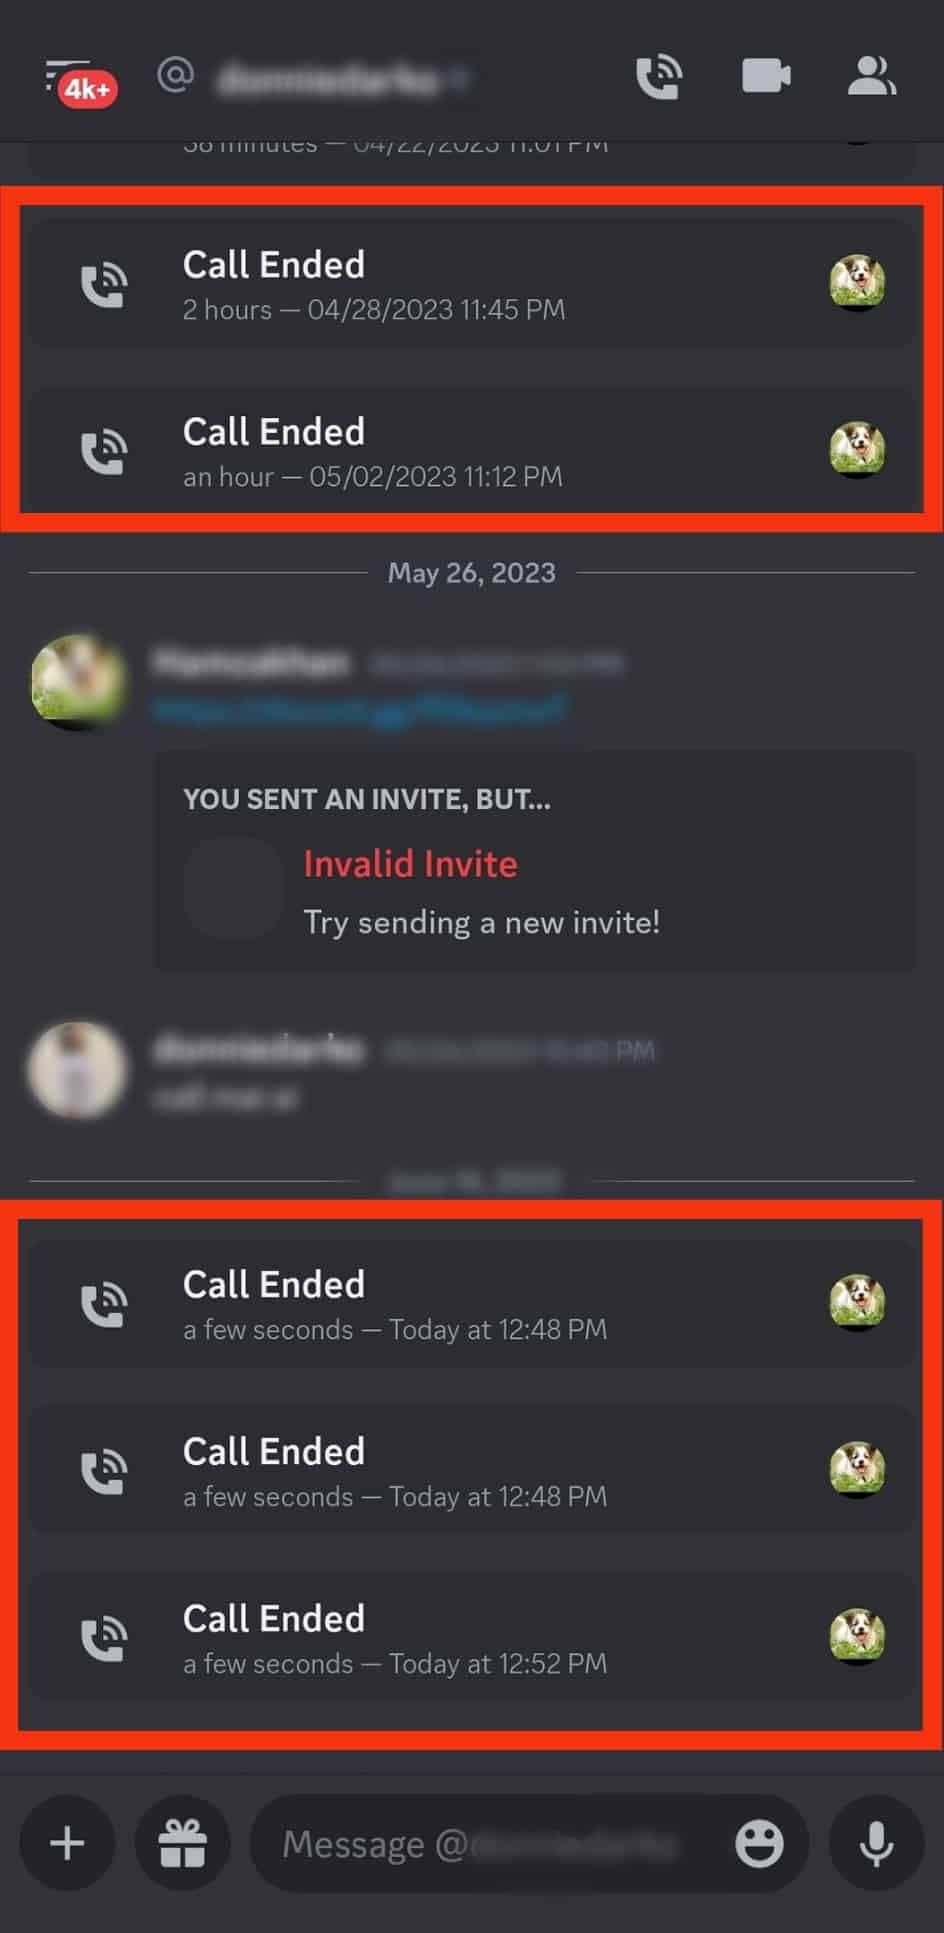 Scroll Down To Check For The Call History